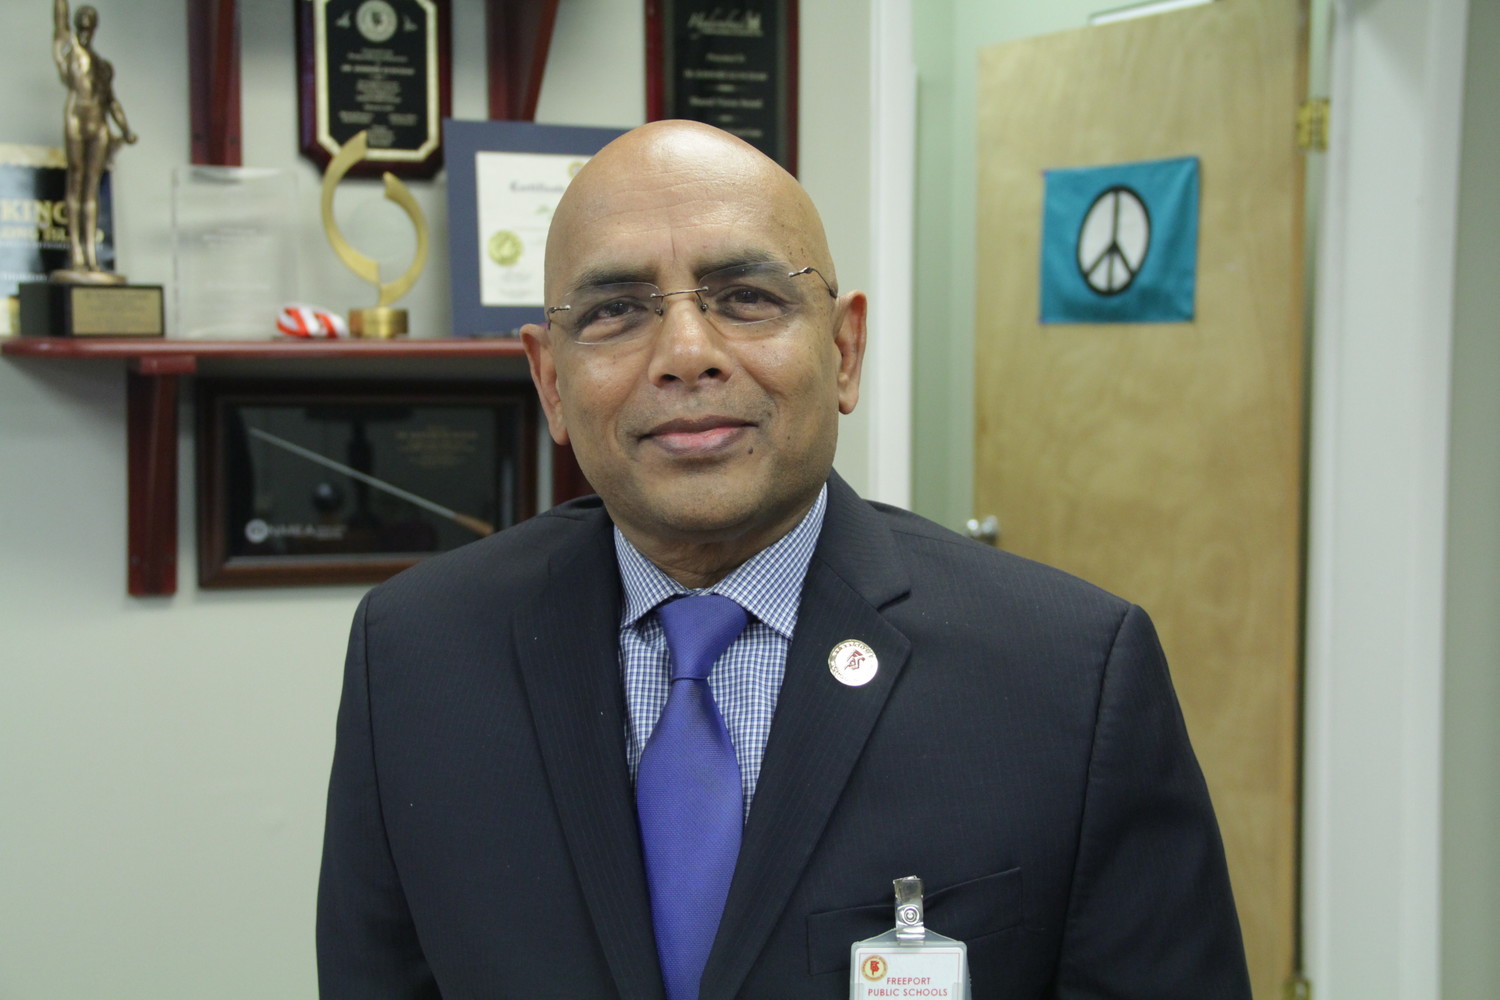 Dr. Kishore Kuncham, superintendent of Freeport School District, shared his plans for school safety following last months shooting in Florida.